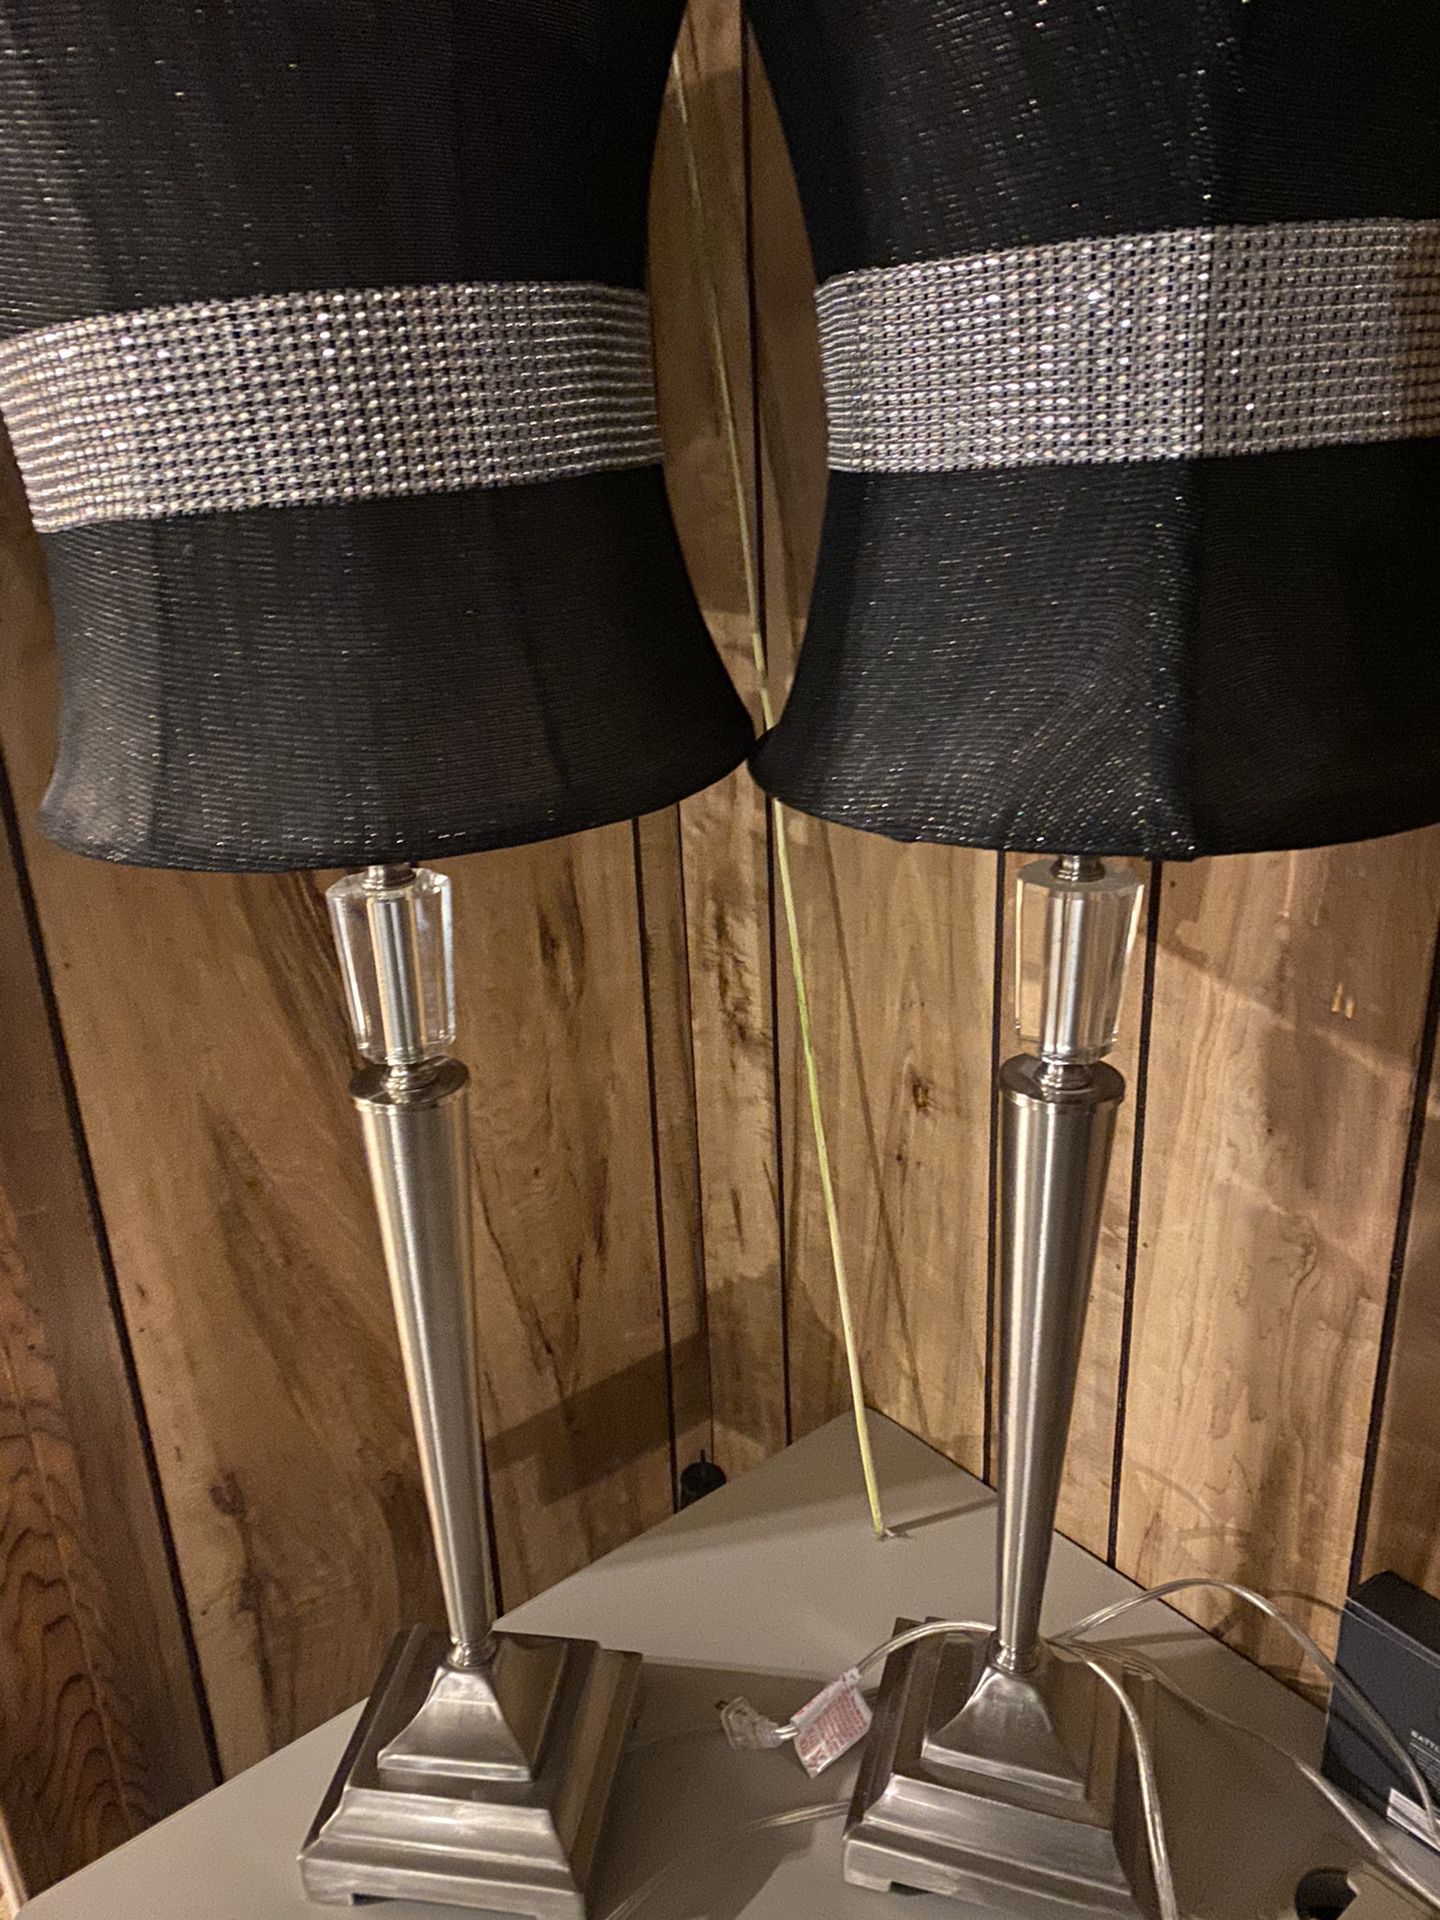 Lamps with lamp shades